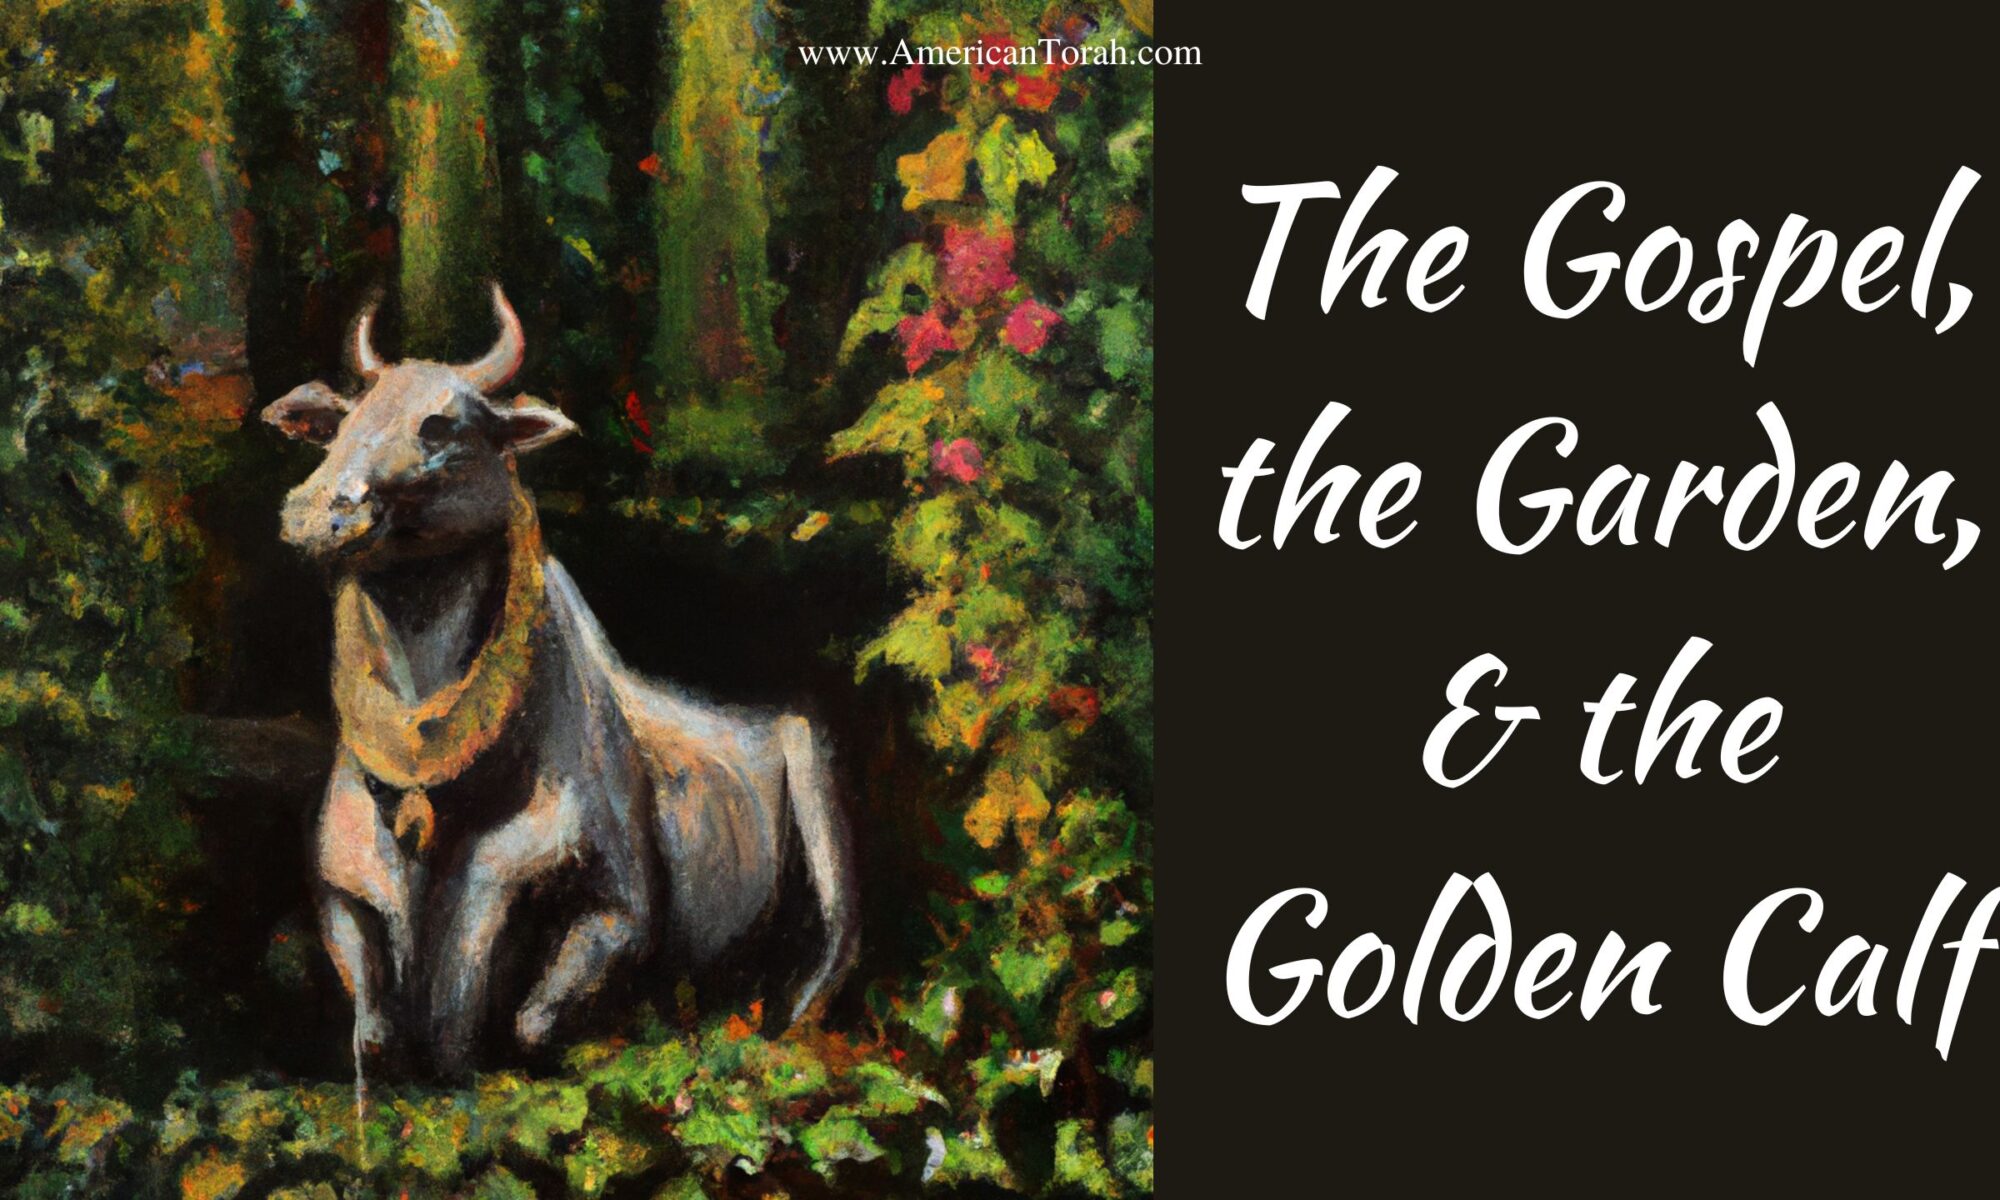 Thematic connections between the Fall in the Garden of Eden, the Golden Calf at Mount Sinai, and the Gospel.